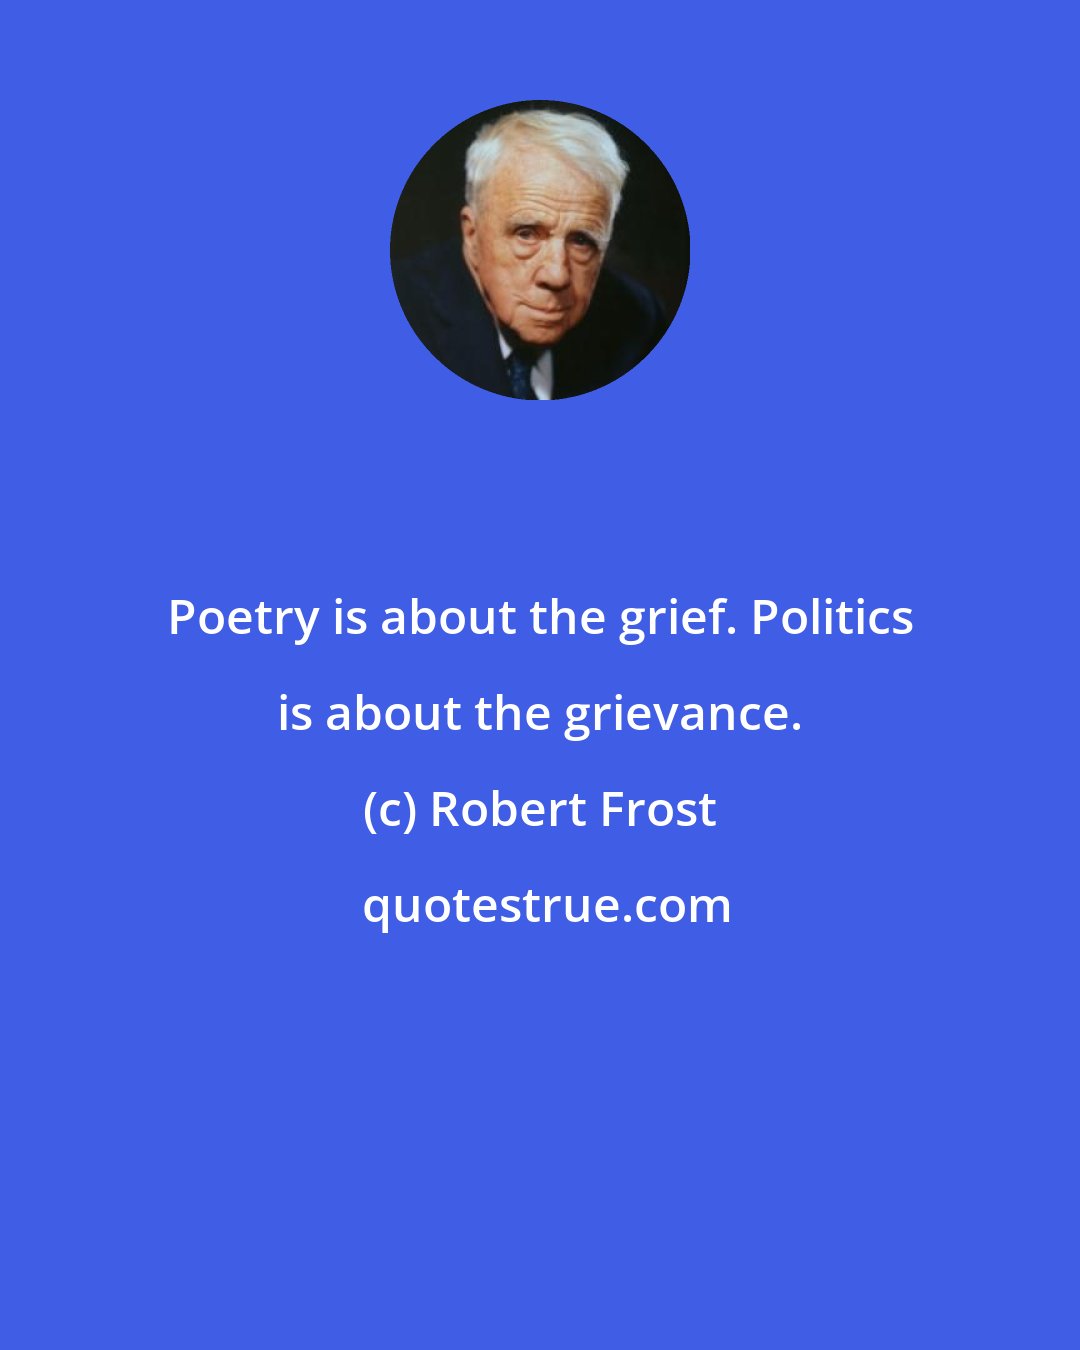 Robert Frost: Poetry is about the grief. Politics is about the grievance.